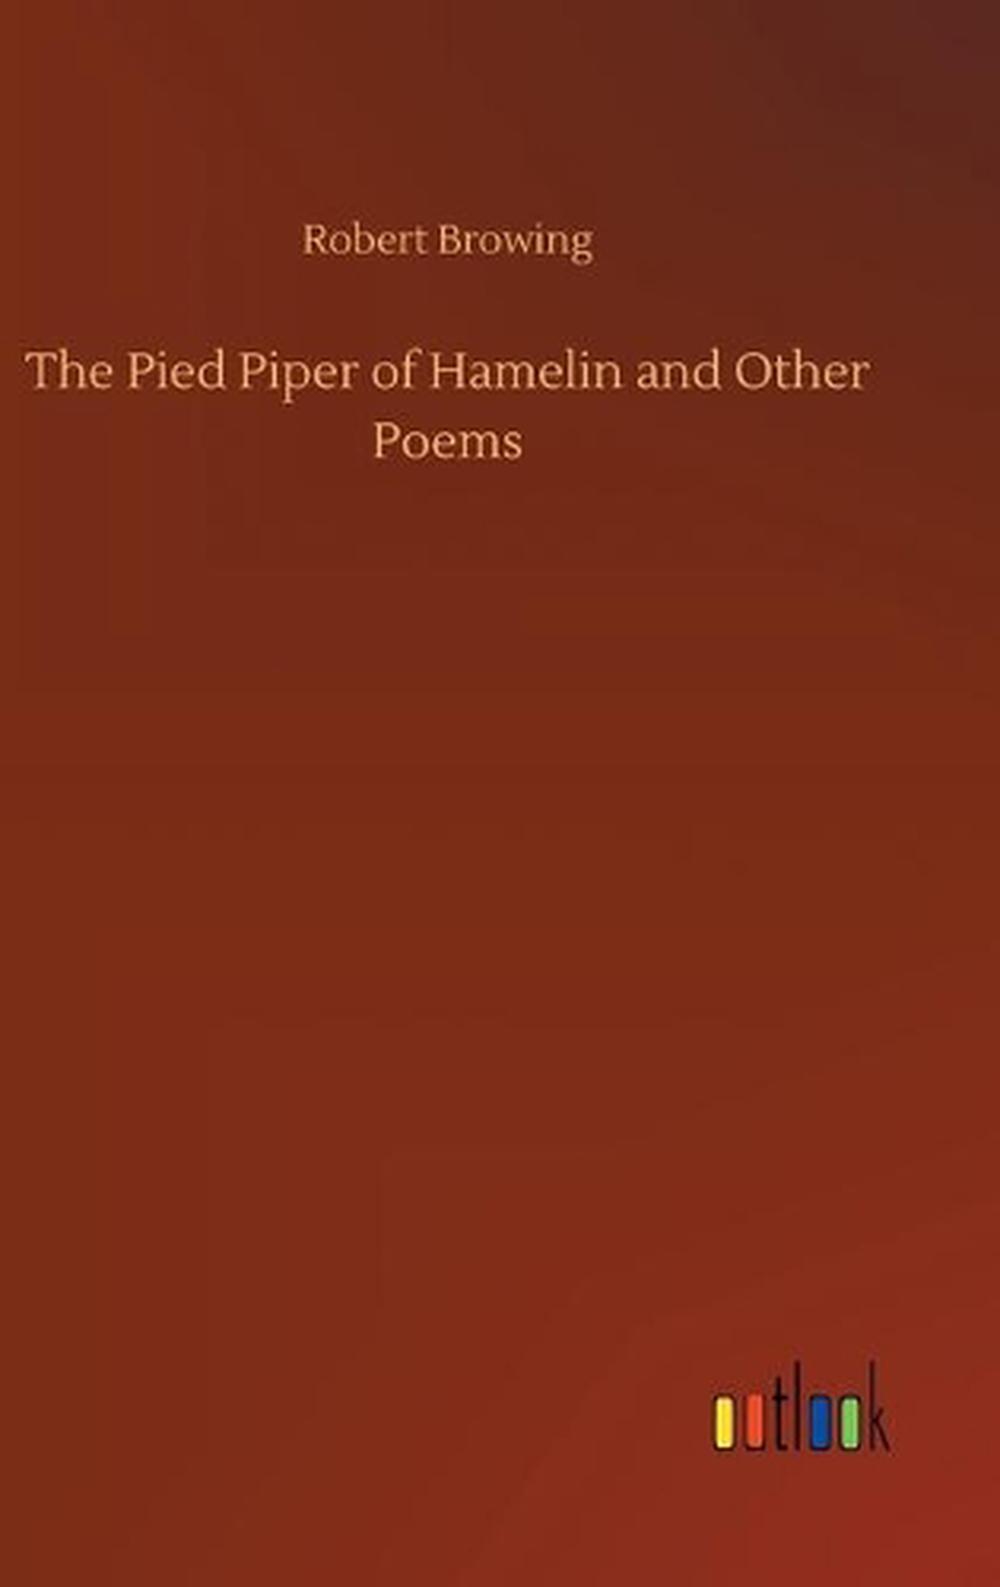 the poem the pied piper of hamelin